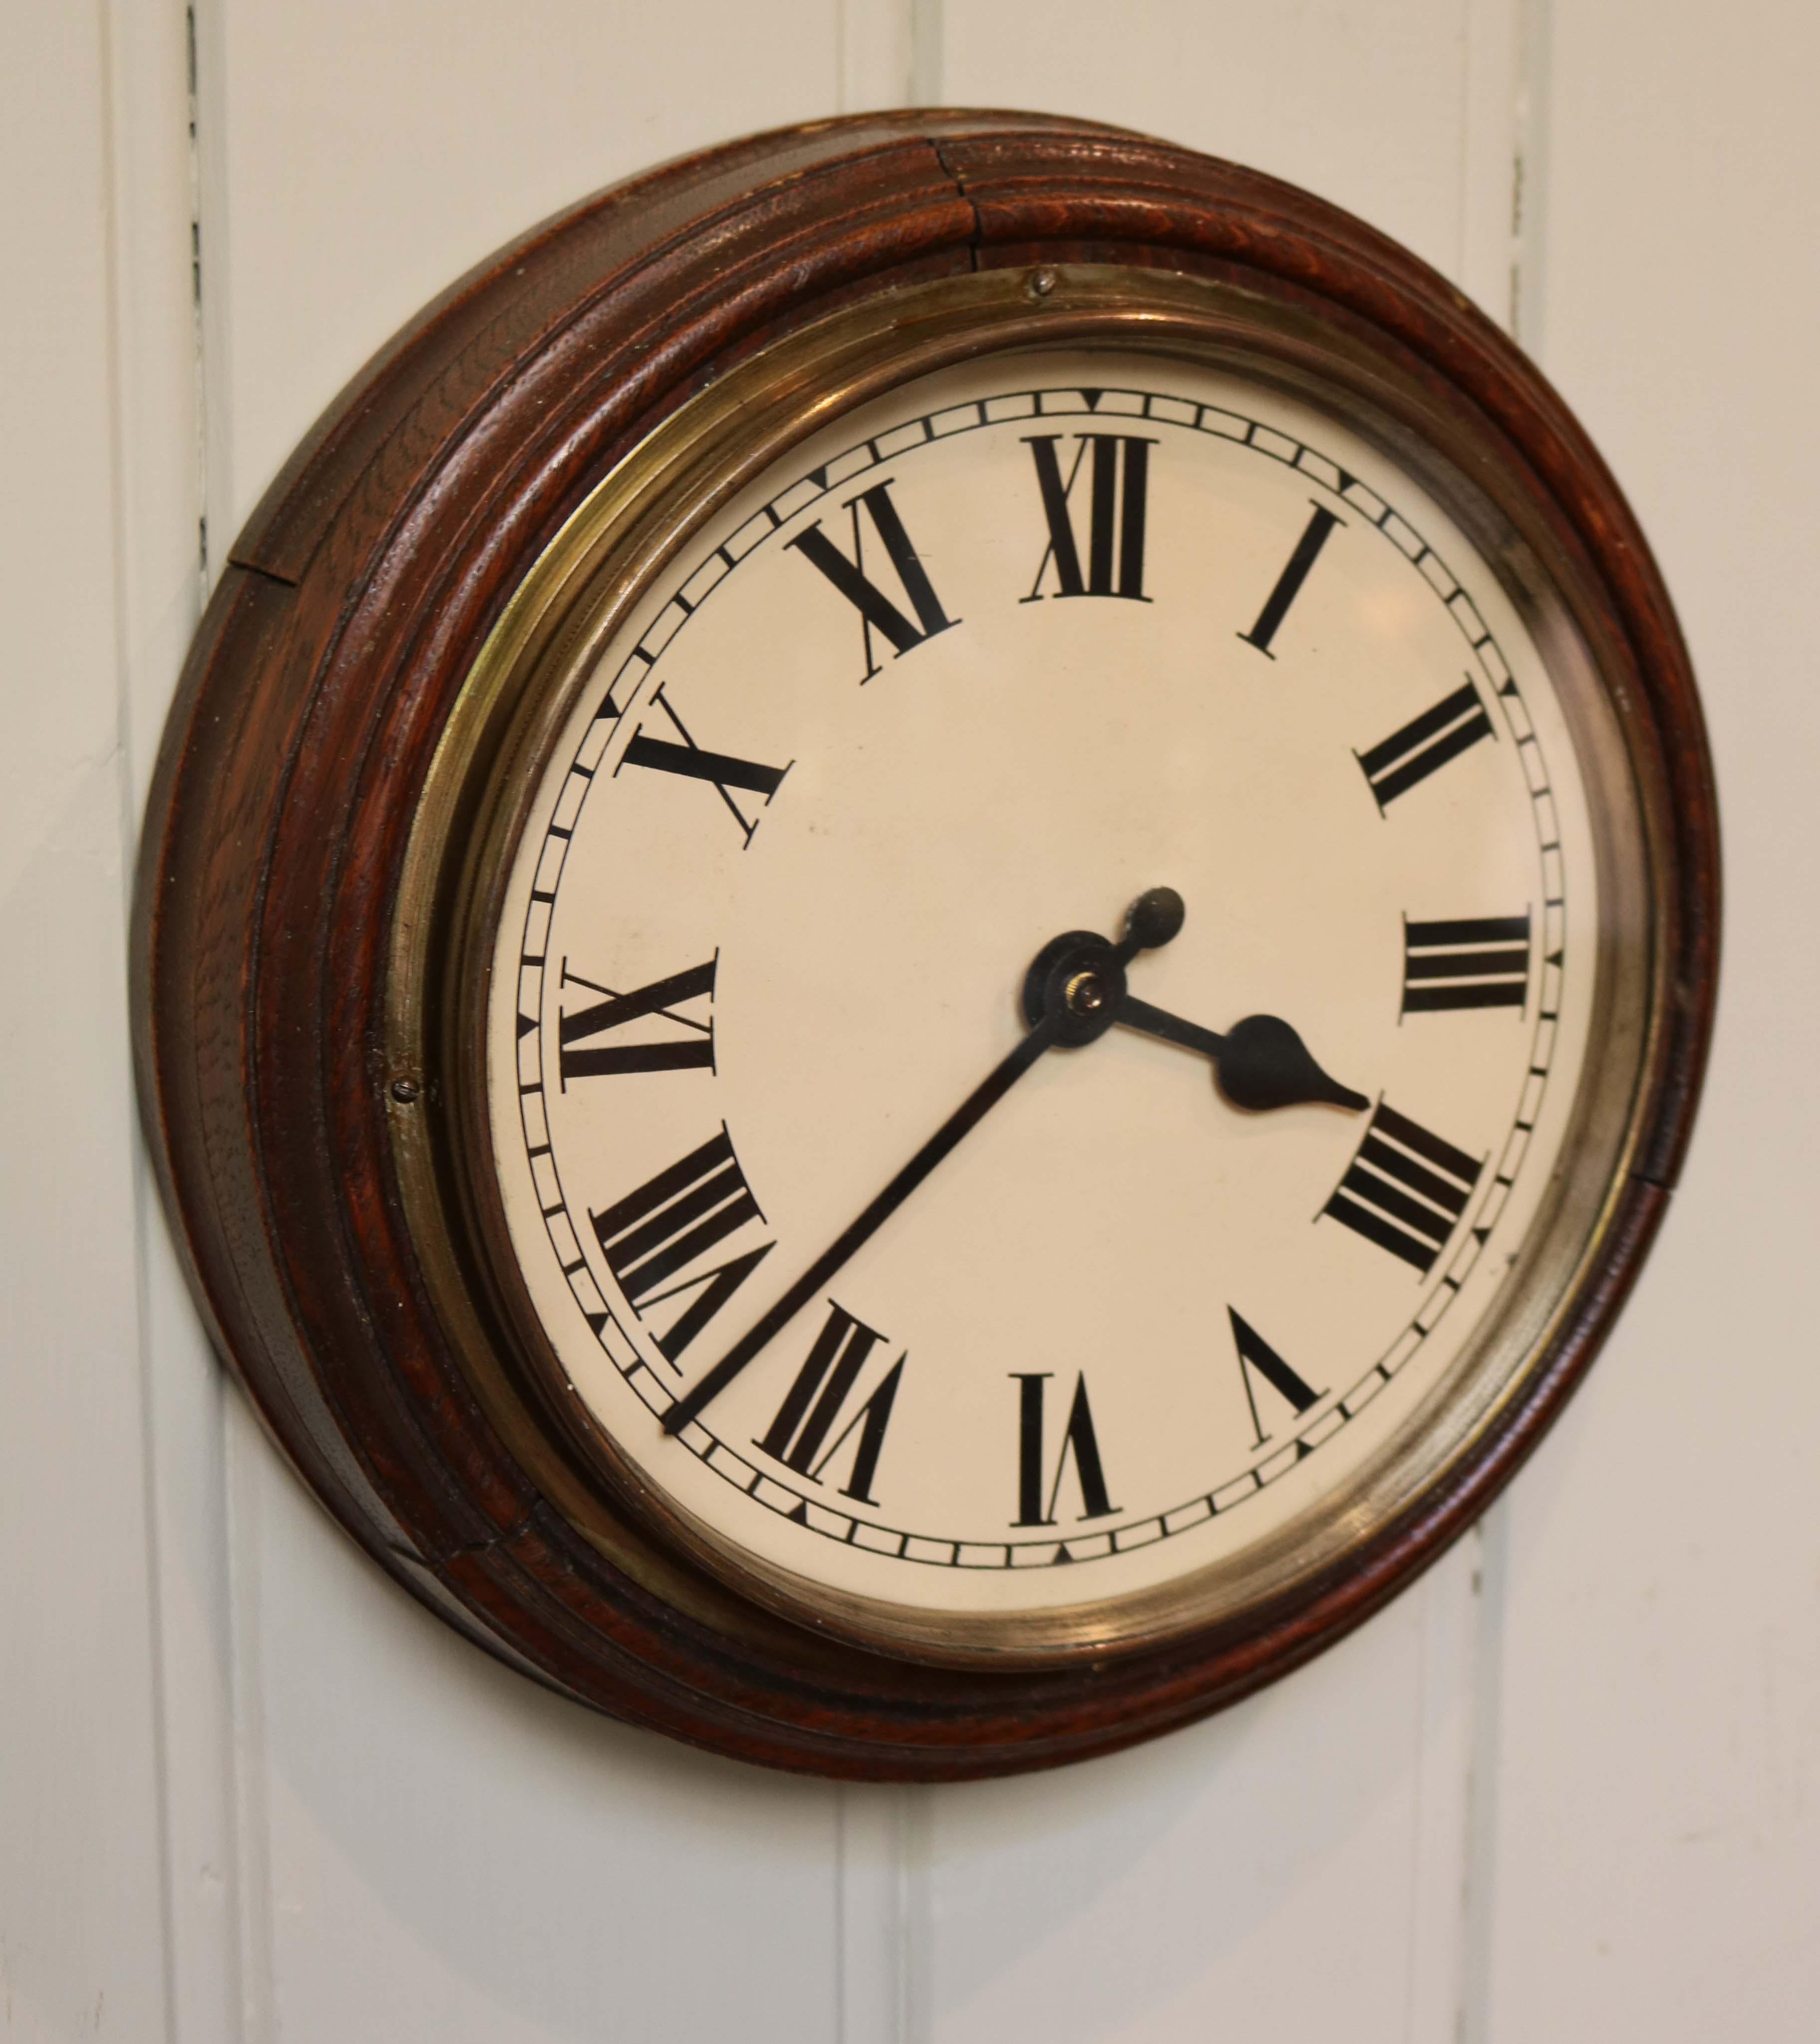 A solid oak school clock, dating to the early 20th Century removed from a Scottish school during conversion. Originally an electrically powered slave clock driven from a master clock. It has its original painted dial and hands, a sectional solid oak